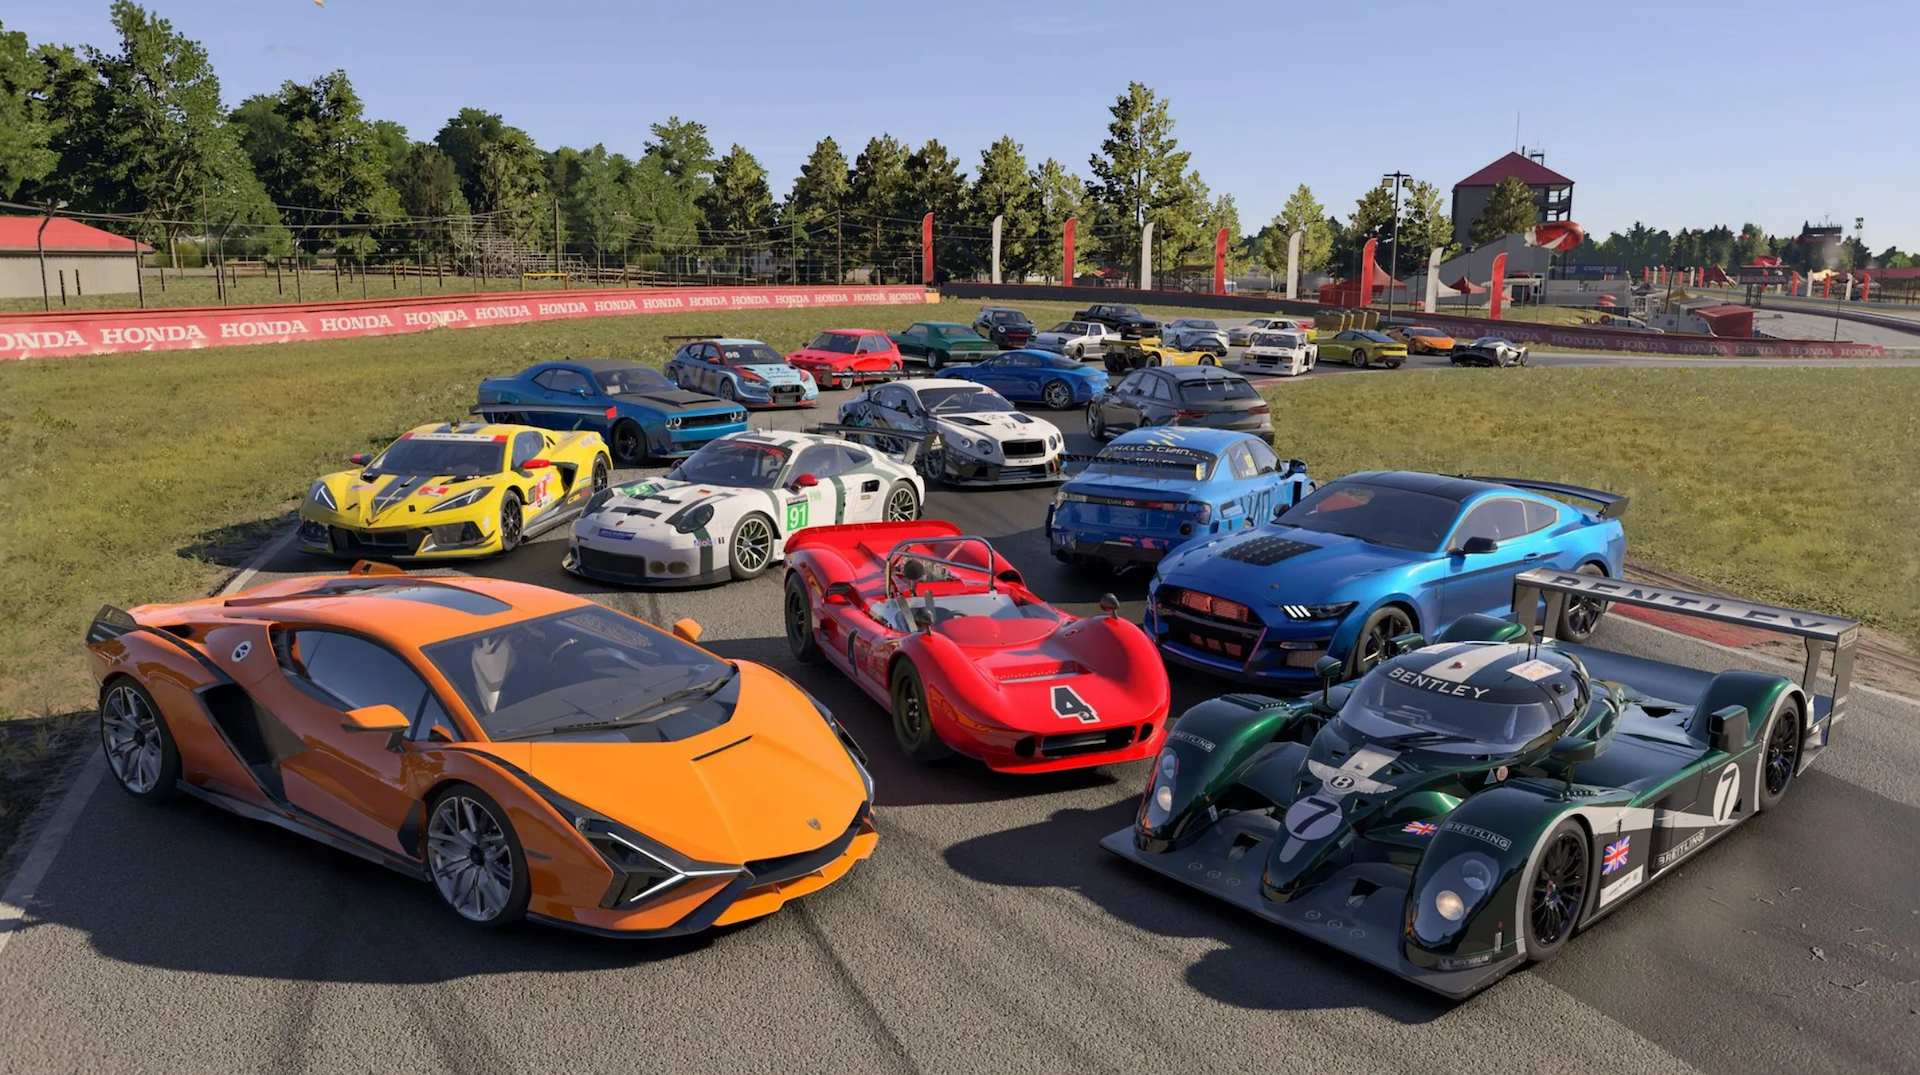 DO NOT BUY FORZA MOTORSPORT ON STEAM HERE IS WHY 